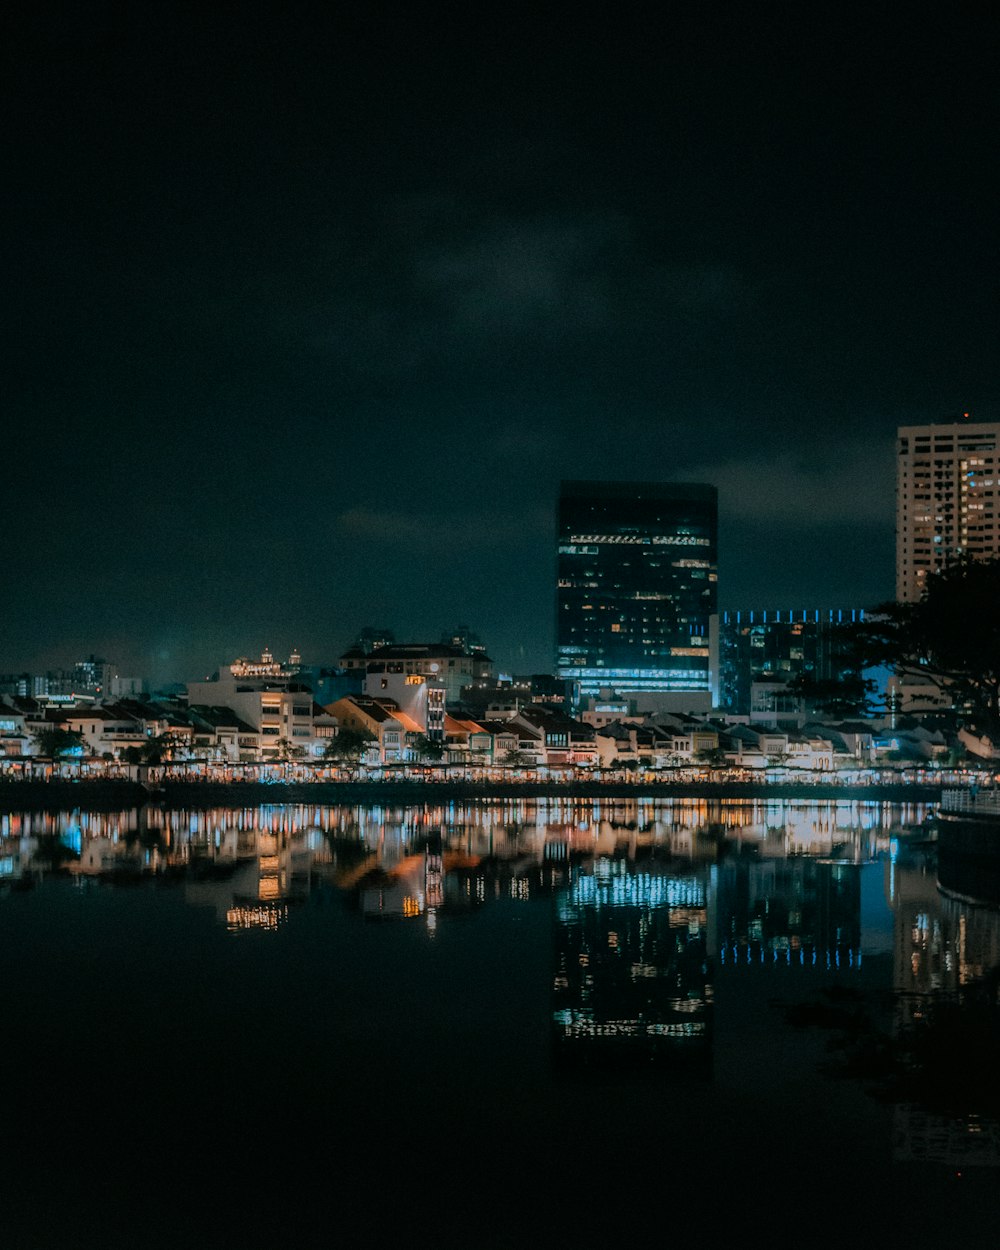 a night view of a city and a body of water